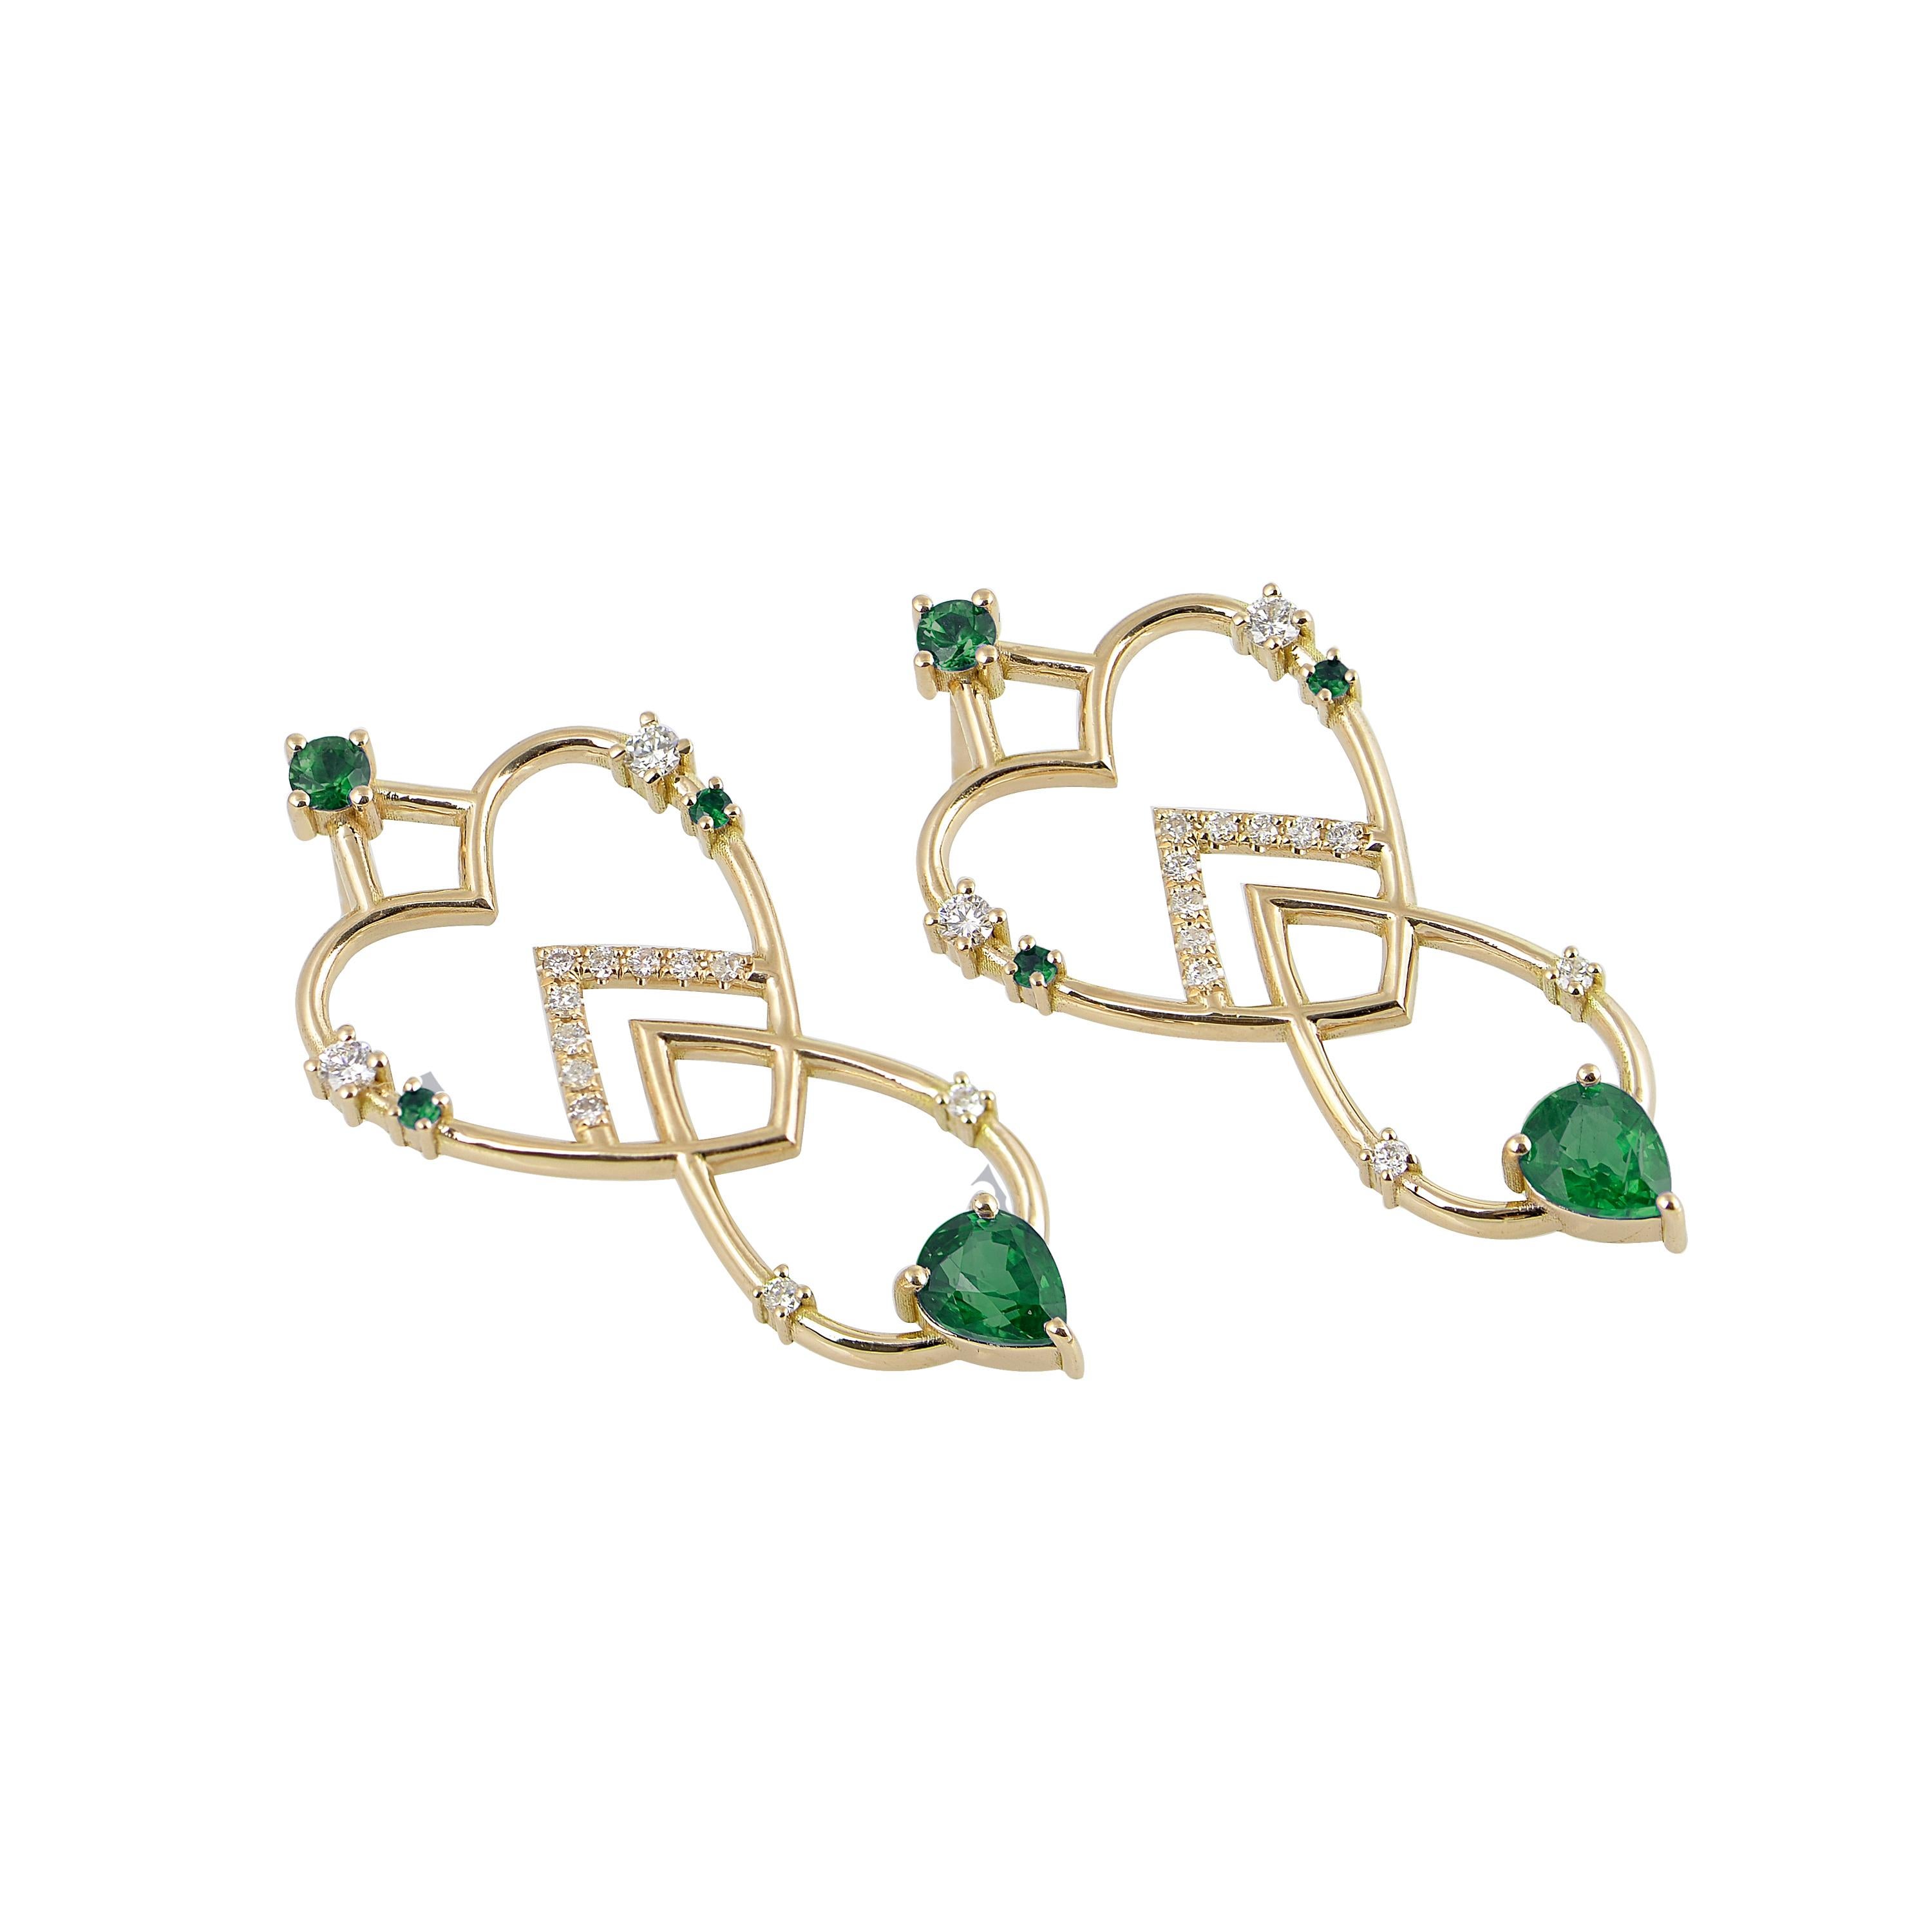 Designer: Alexia Gryllaki
Dimensions: L34x16mm
Weight: approximately 5.9g (pair)
Barcode: ING005EE

The Interlocking Geometry earrings in 18 karat yellow gold with emeralds approx. 0.91cts and round brilliant-cut diamonds approx. 0.24cts.

About the